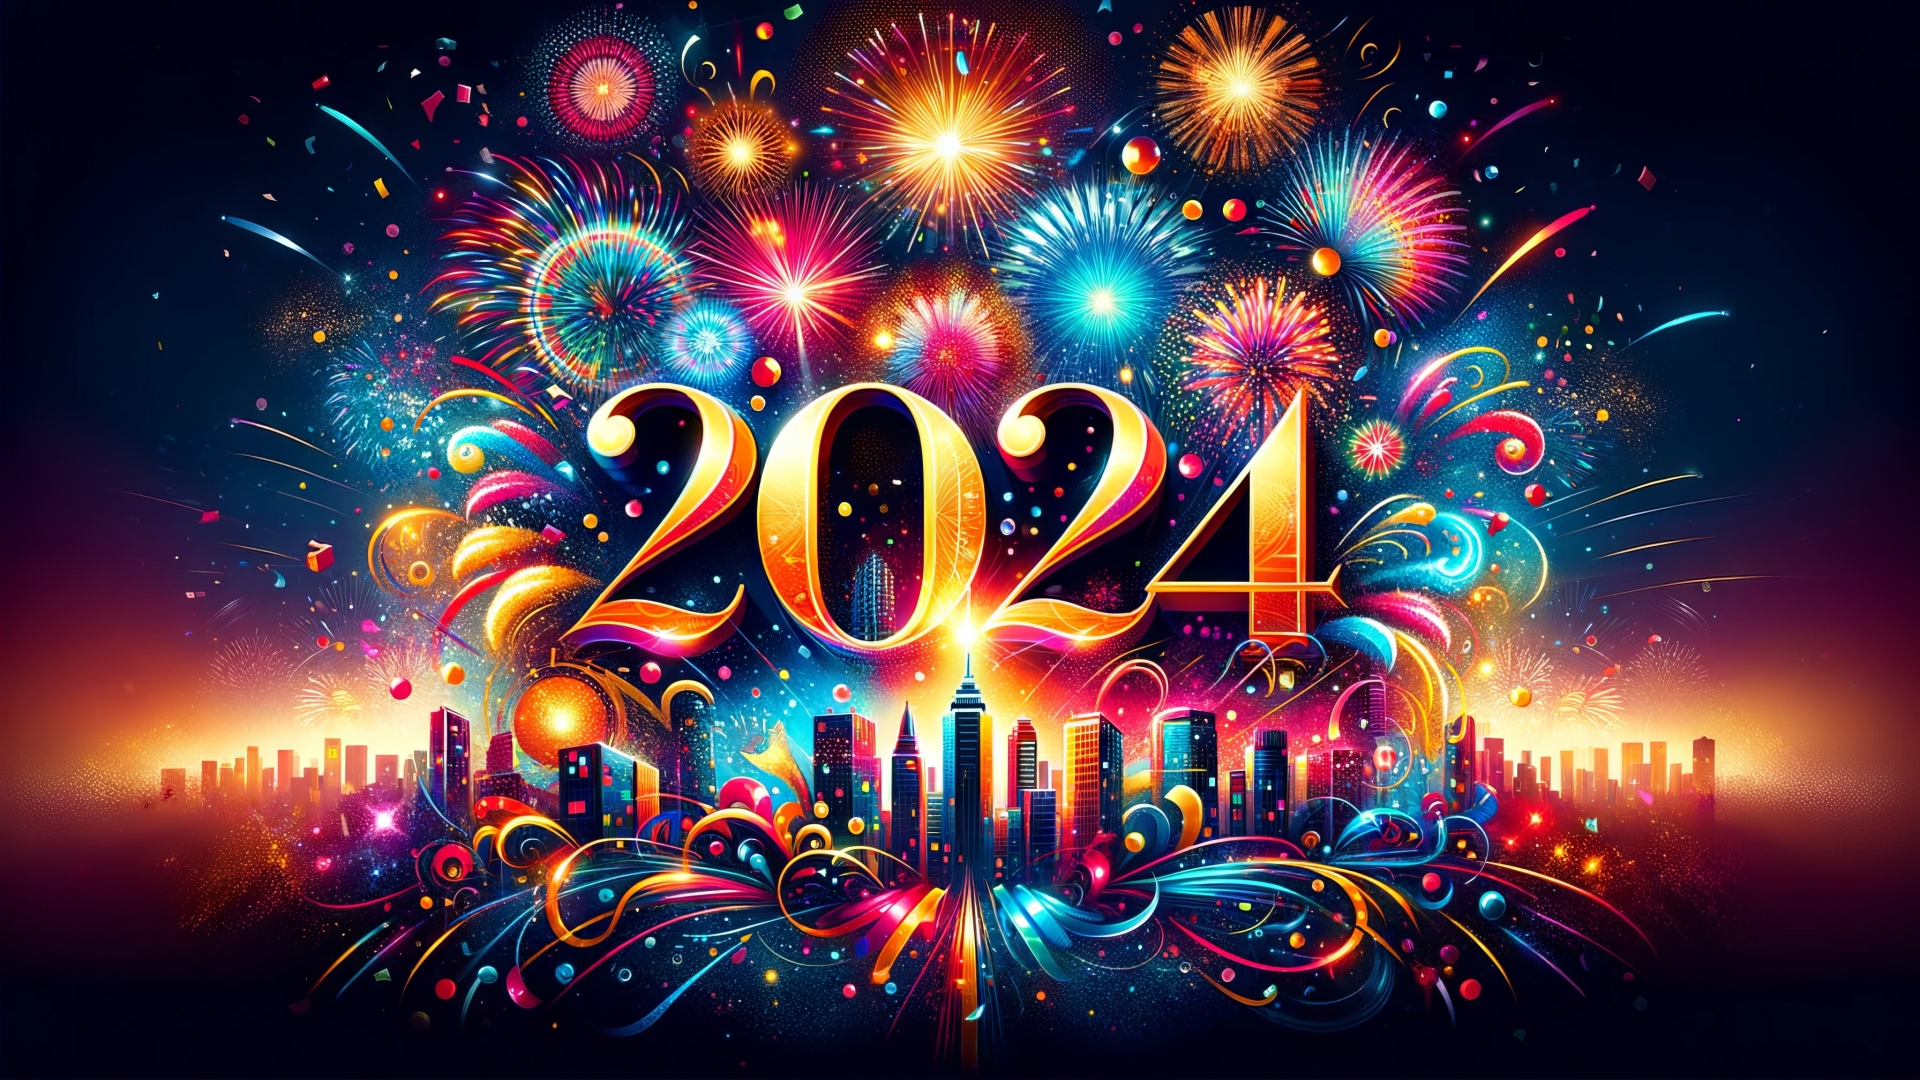 1920x1080 Resolution 2024 New Year HD Colorful 2024 Fireworks Greeting